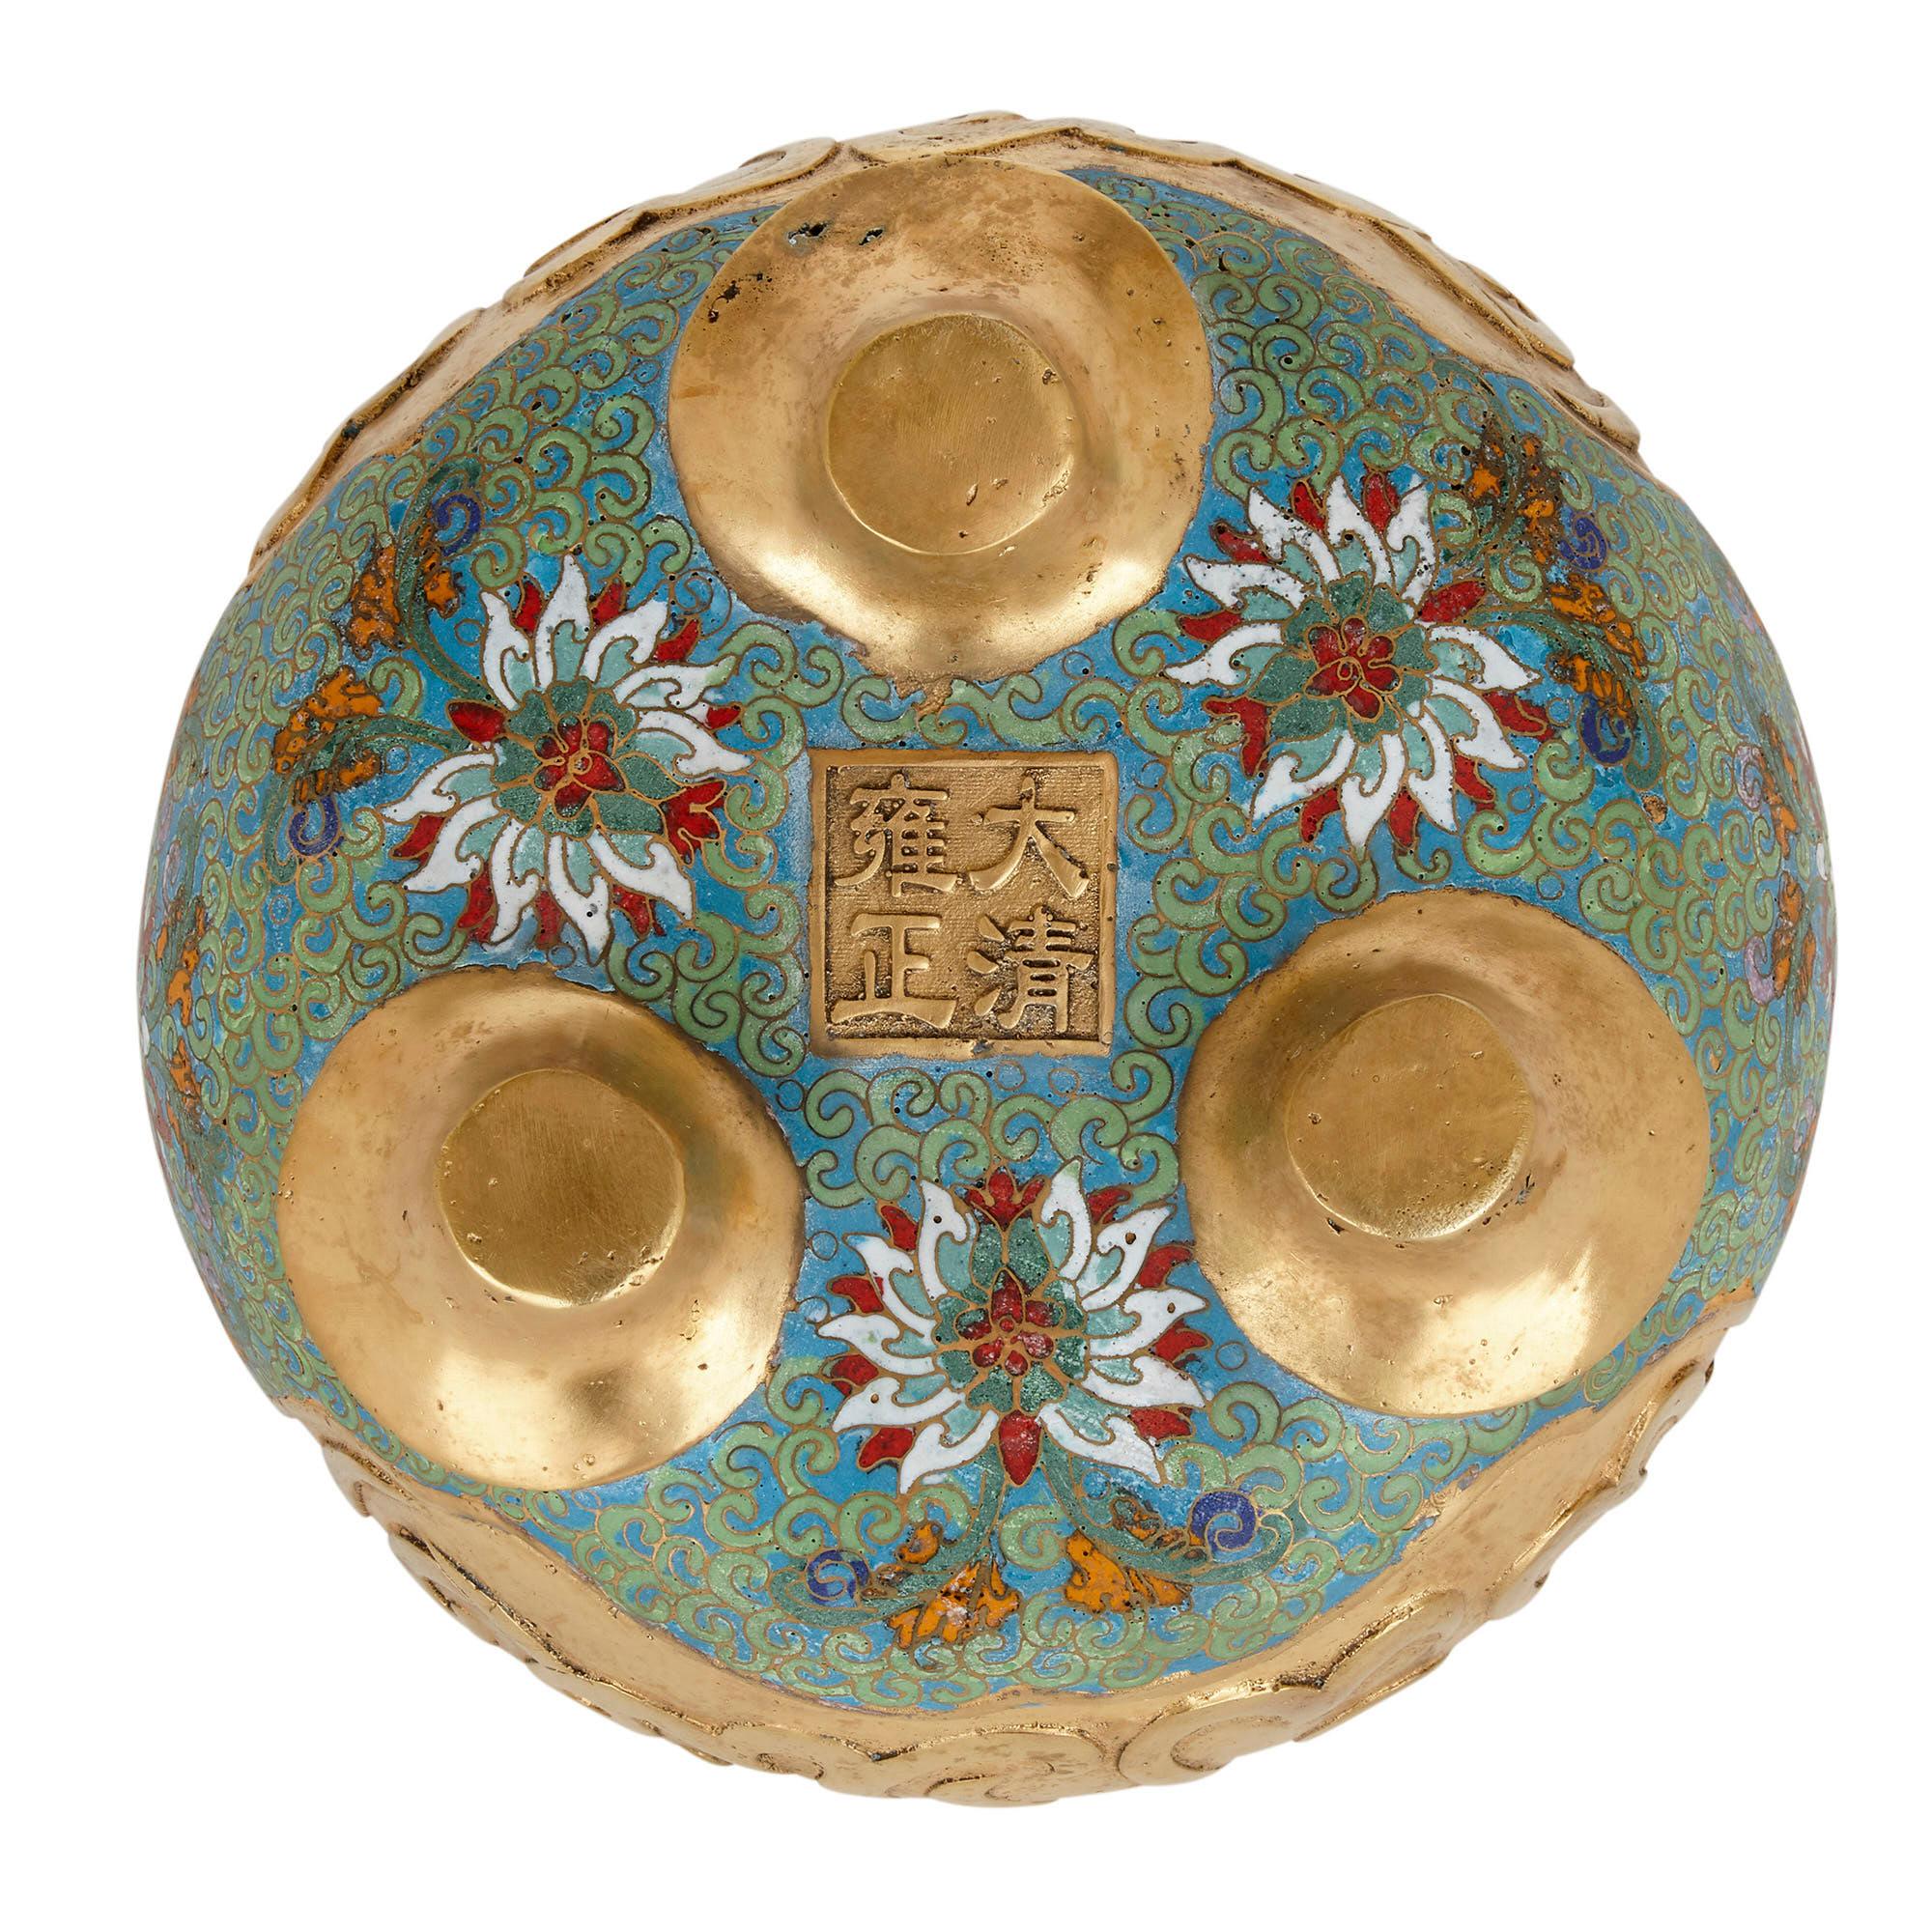 20th Century Chinese Ormolu and Cloisonné Enamel Vase for the Islamic Market For Sale